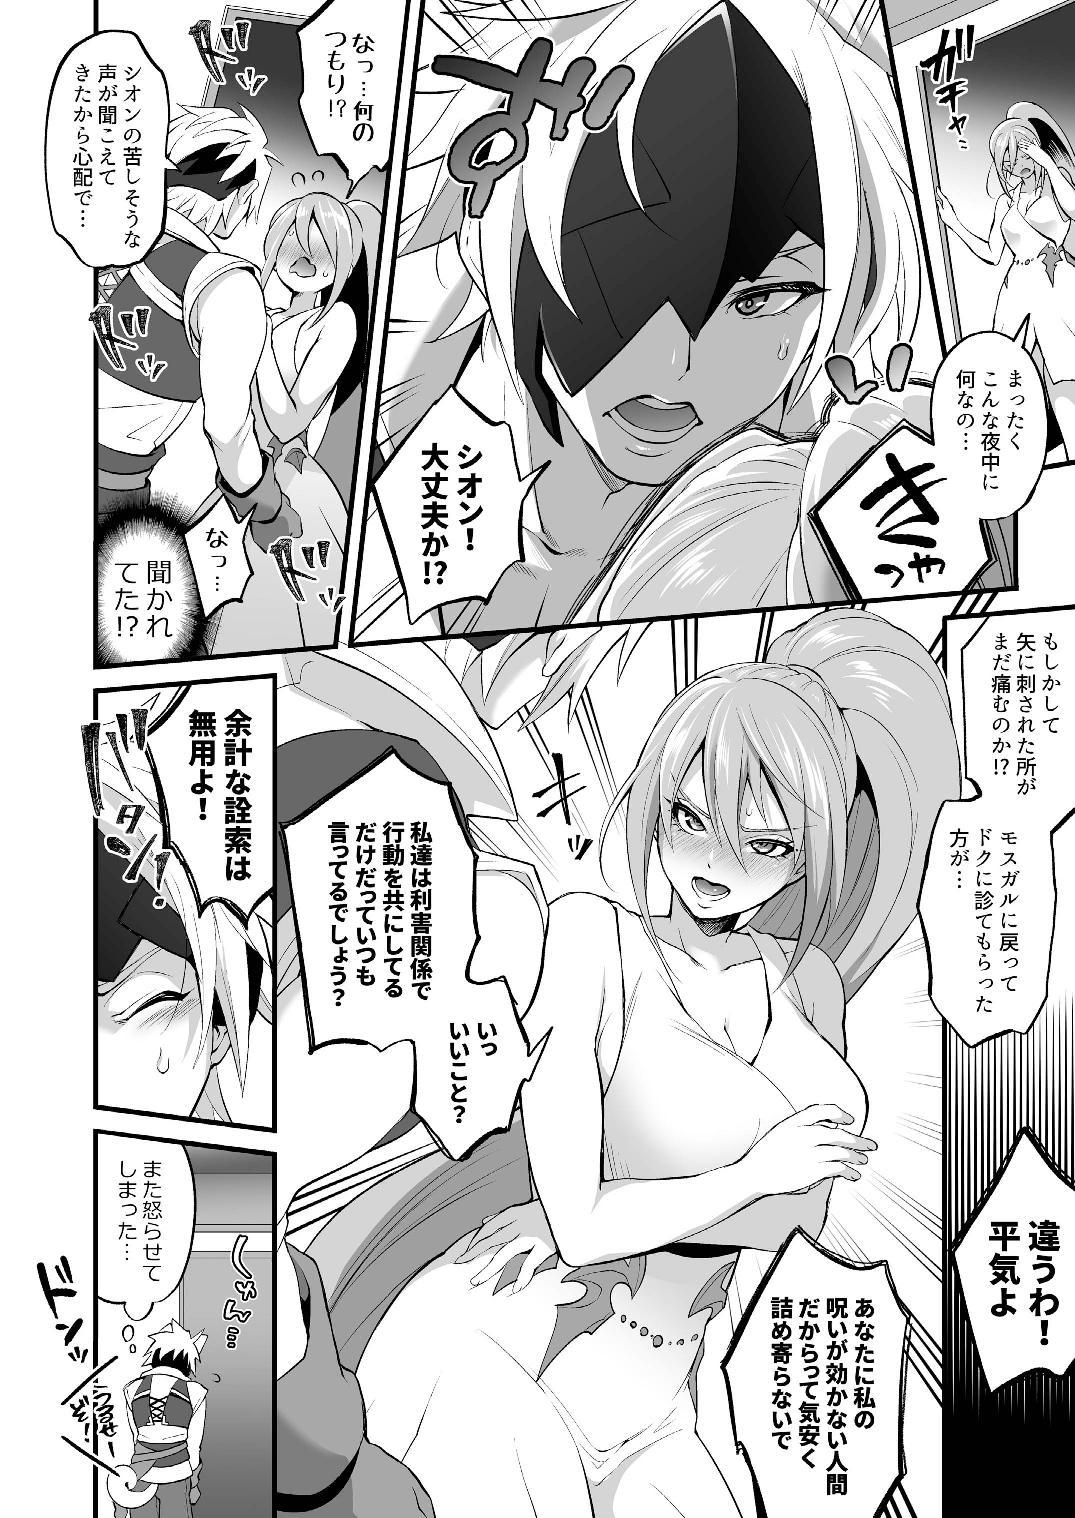 Spanish 私に詰め寄ると〇〇〇がイくわよ…! - Tales of arise Girls Getting Fucked - Page 8